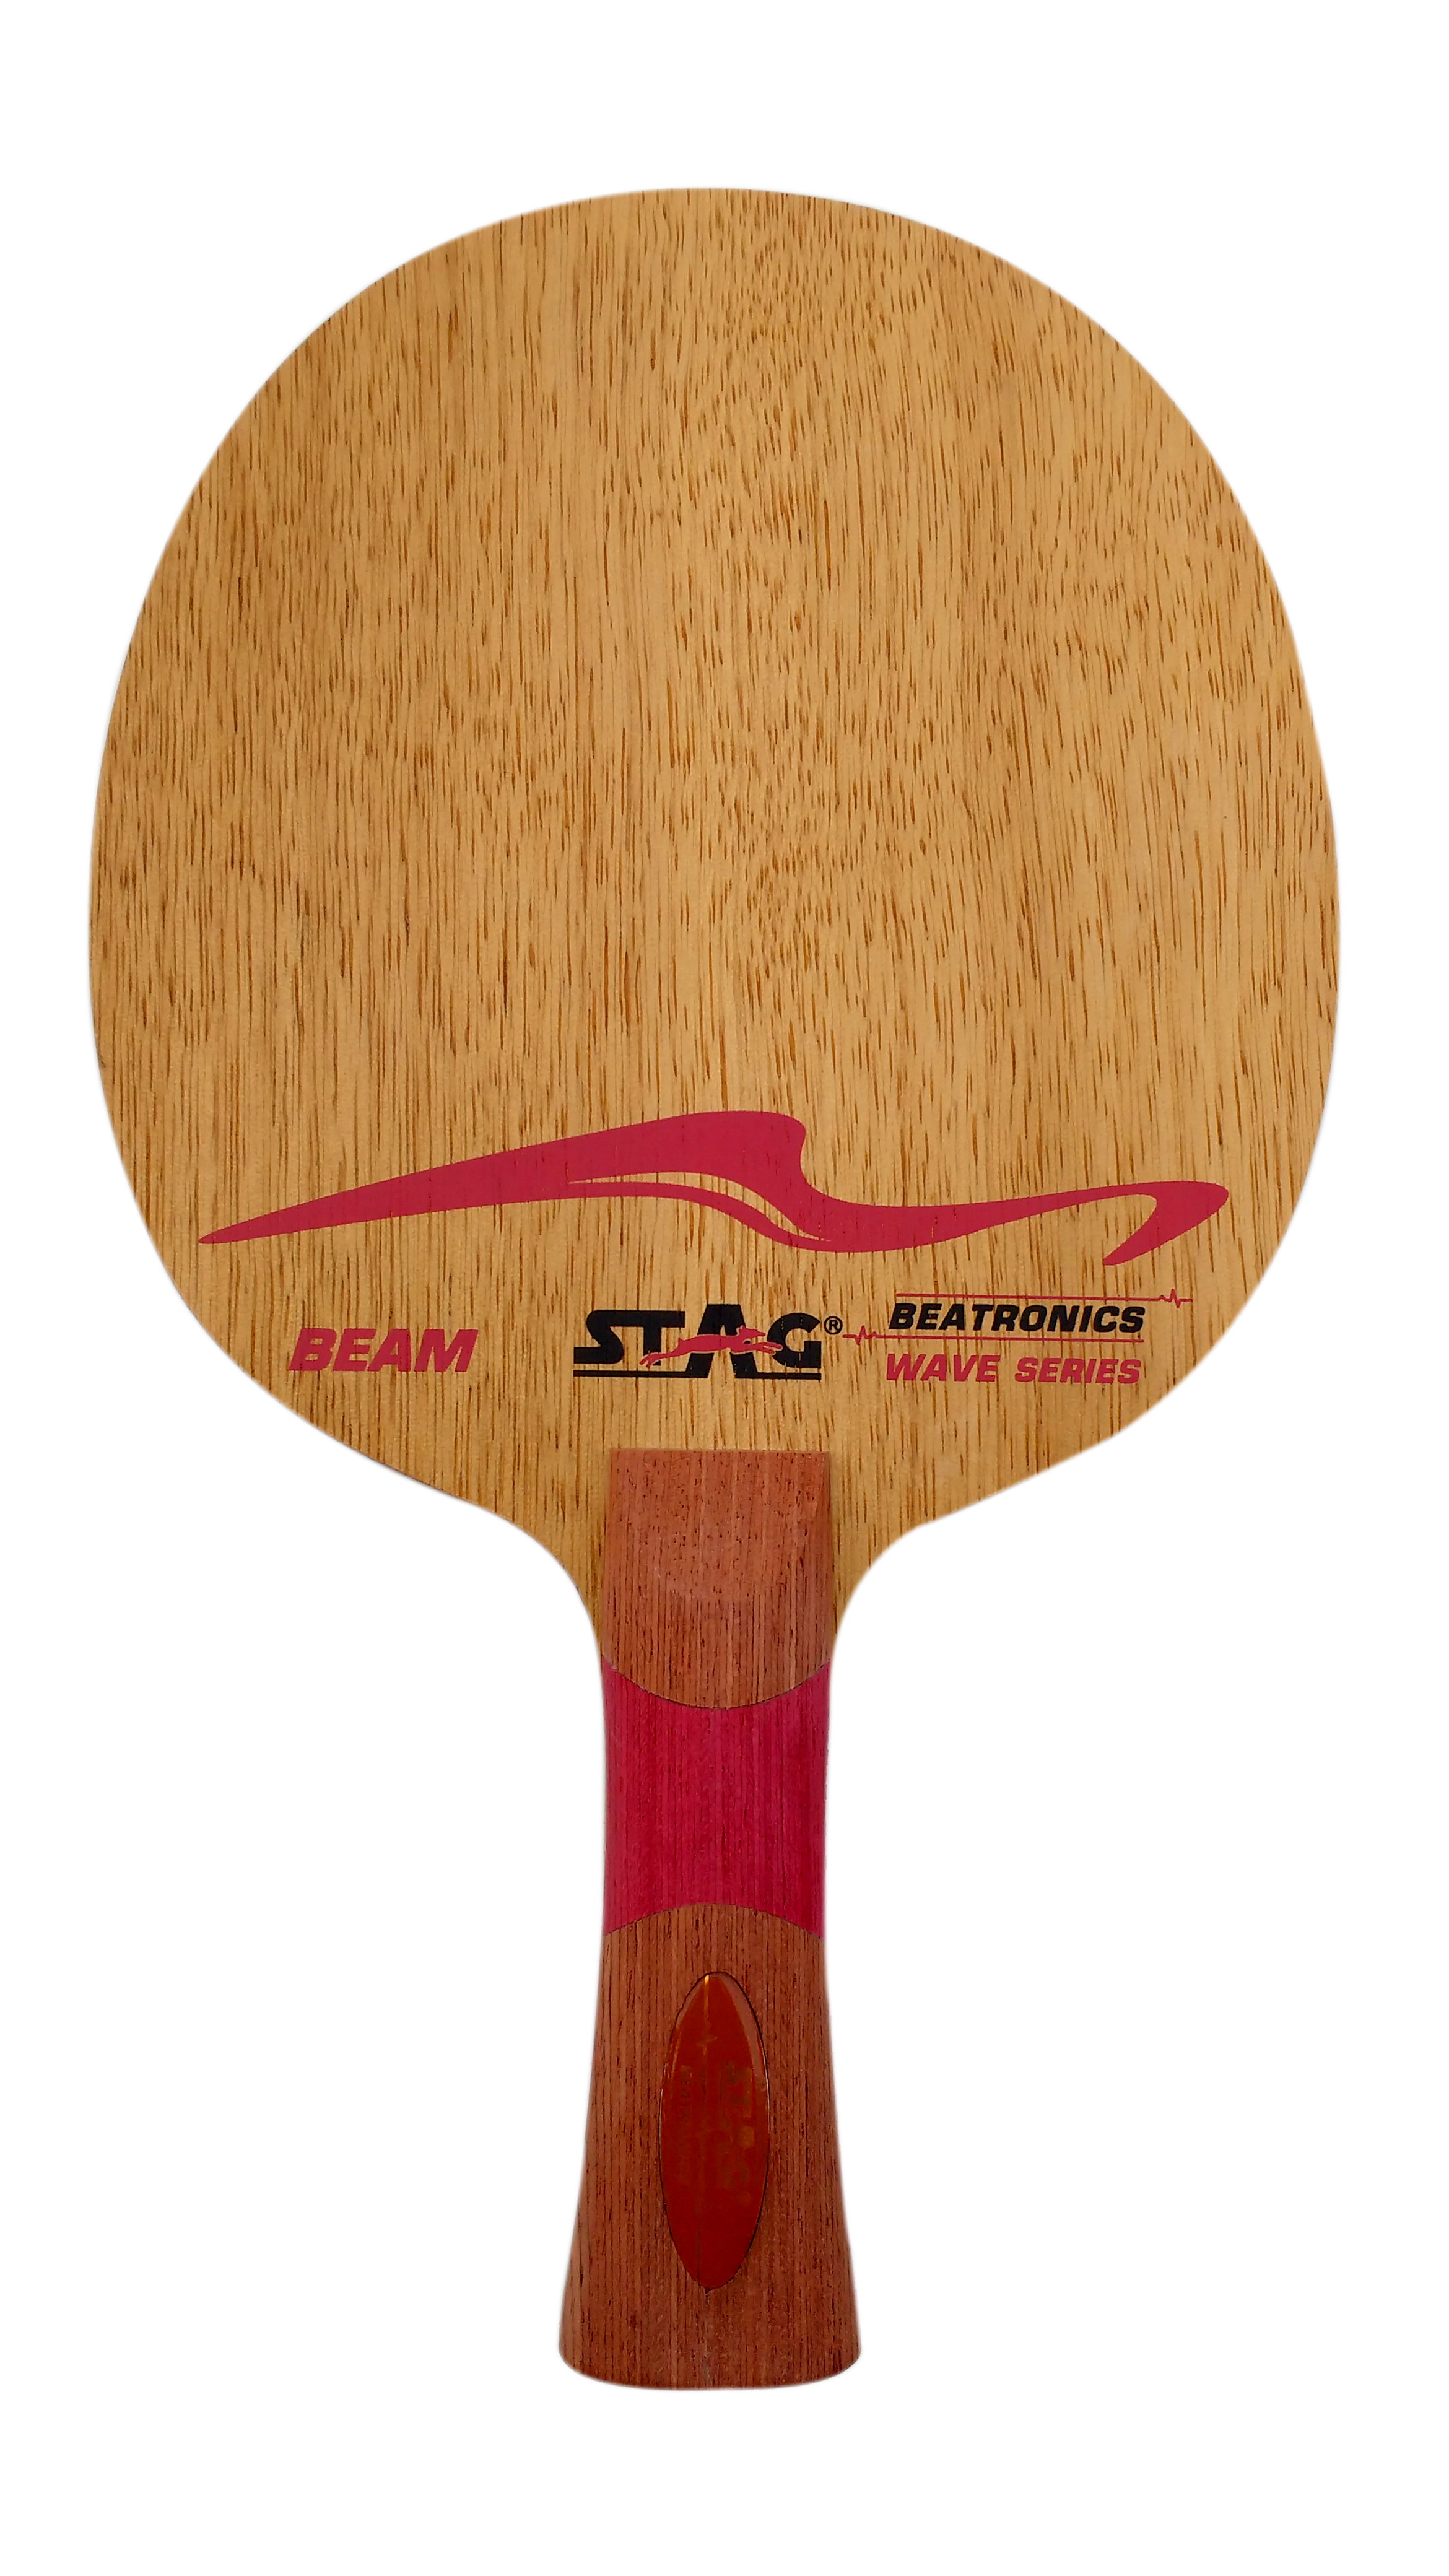 Stag Beatronics Wave Beam Table Tennis Blade